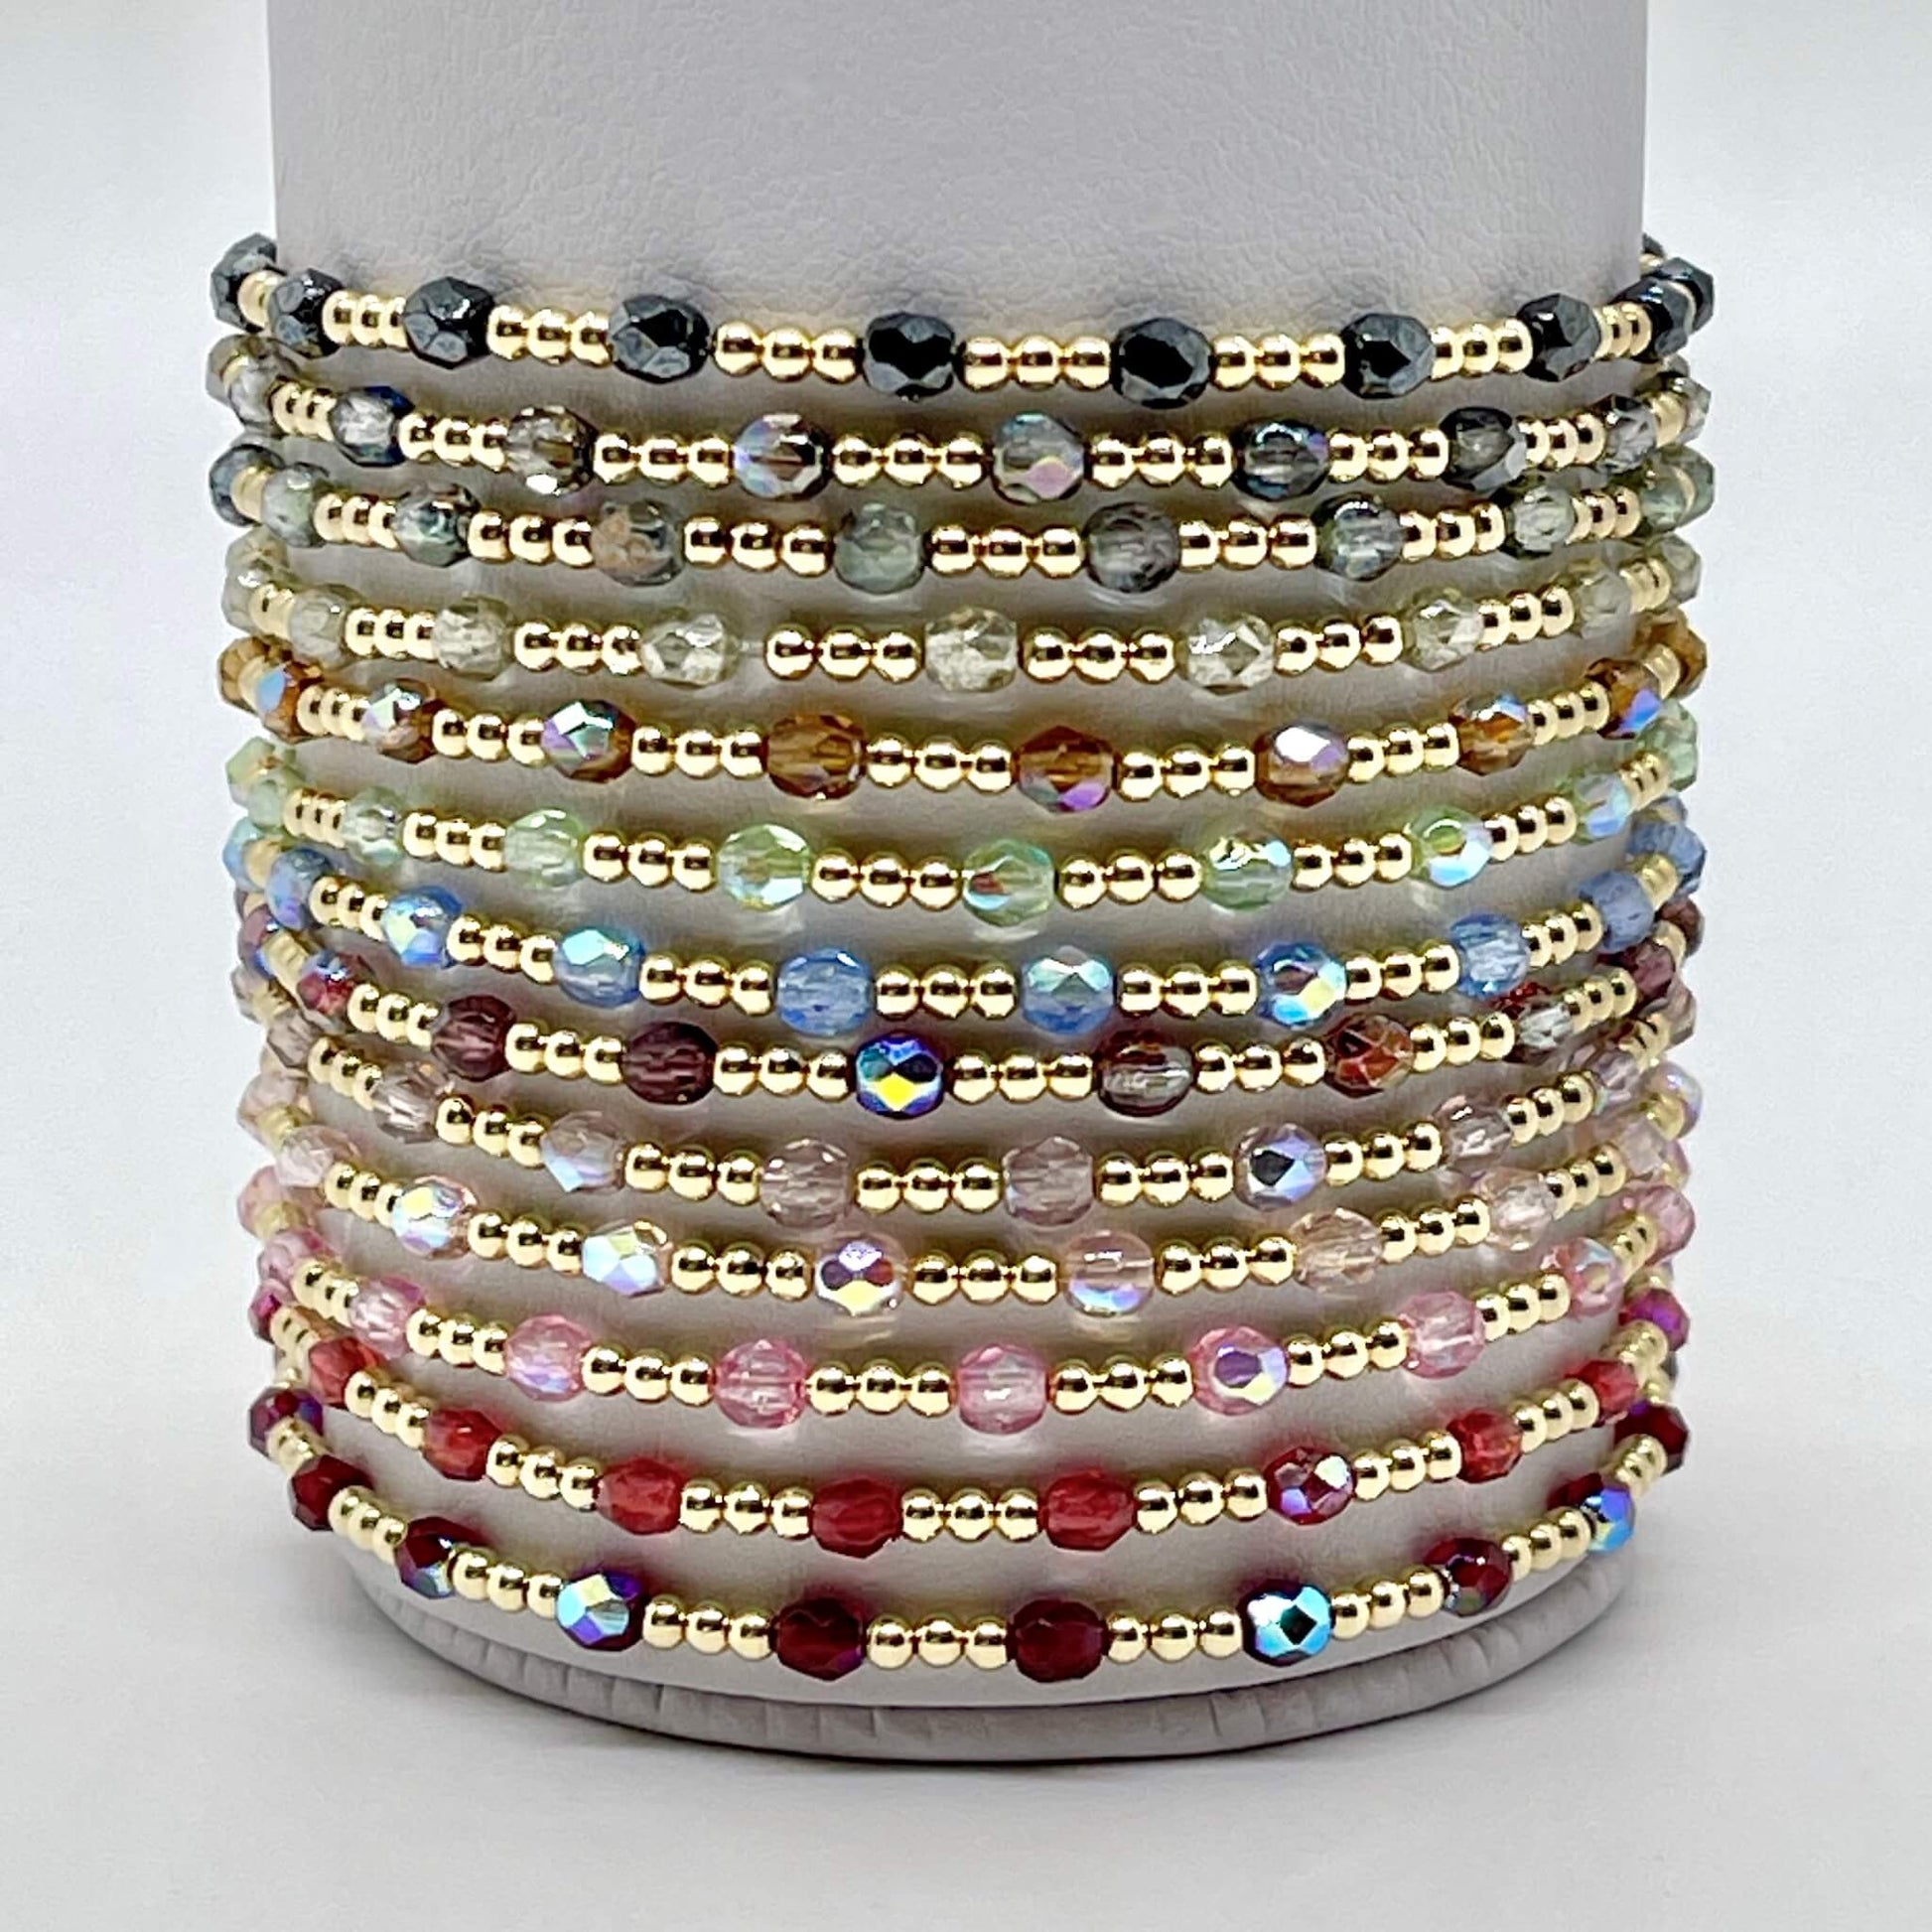 Bracelets with crystal beads and tiny 2mm 14K gold filled beads. A wide range of colors. Dainty womens stretch bracelets.